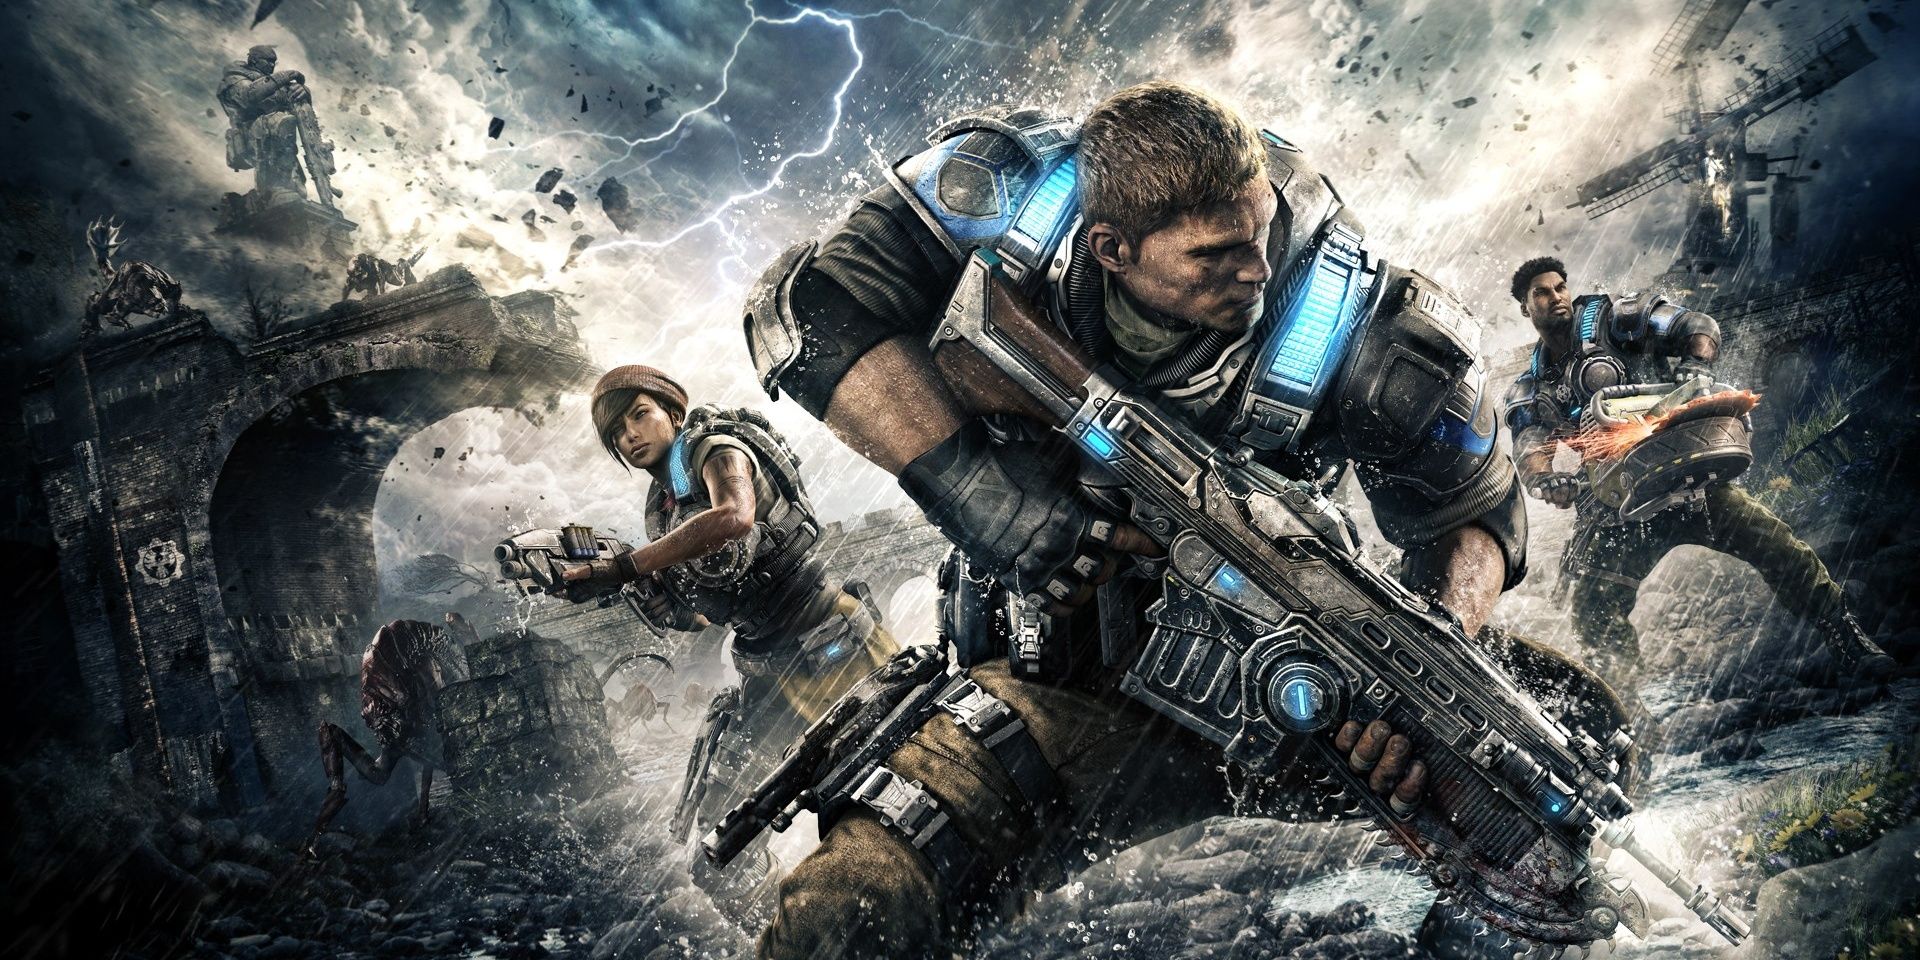 Gears of War 4 Promotional Image